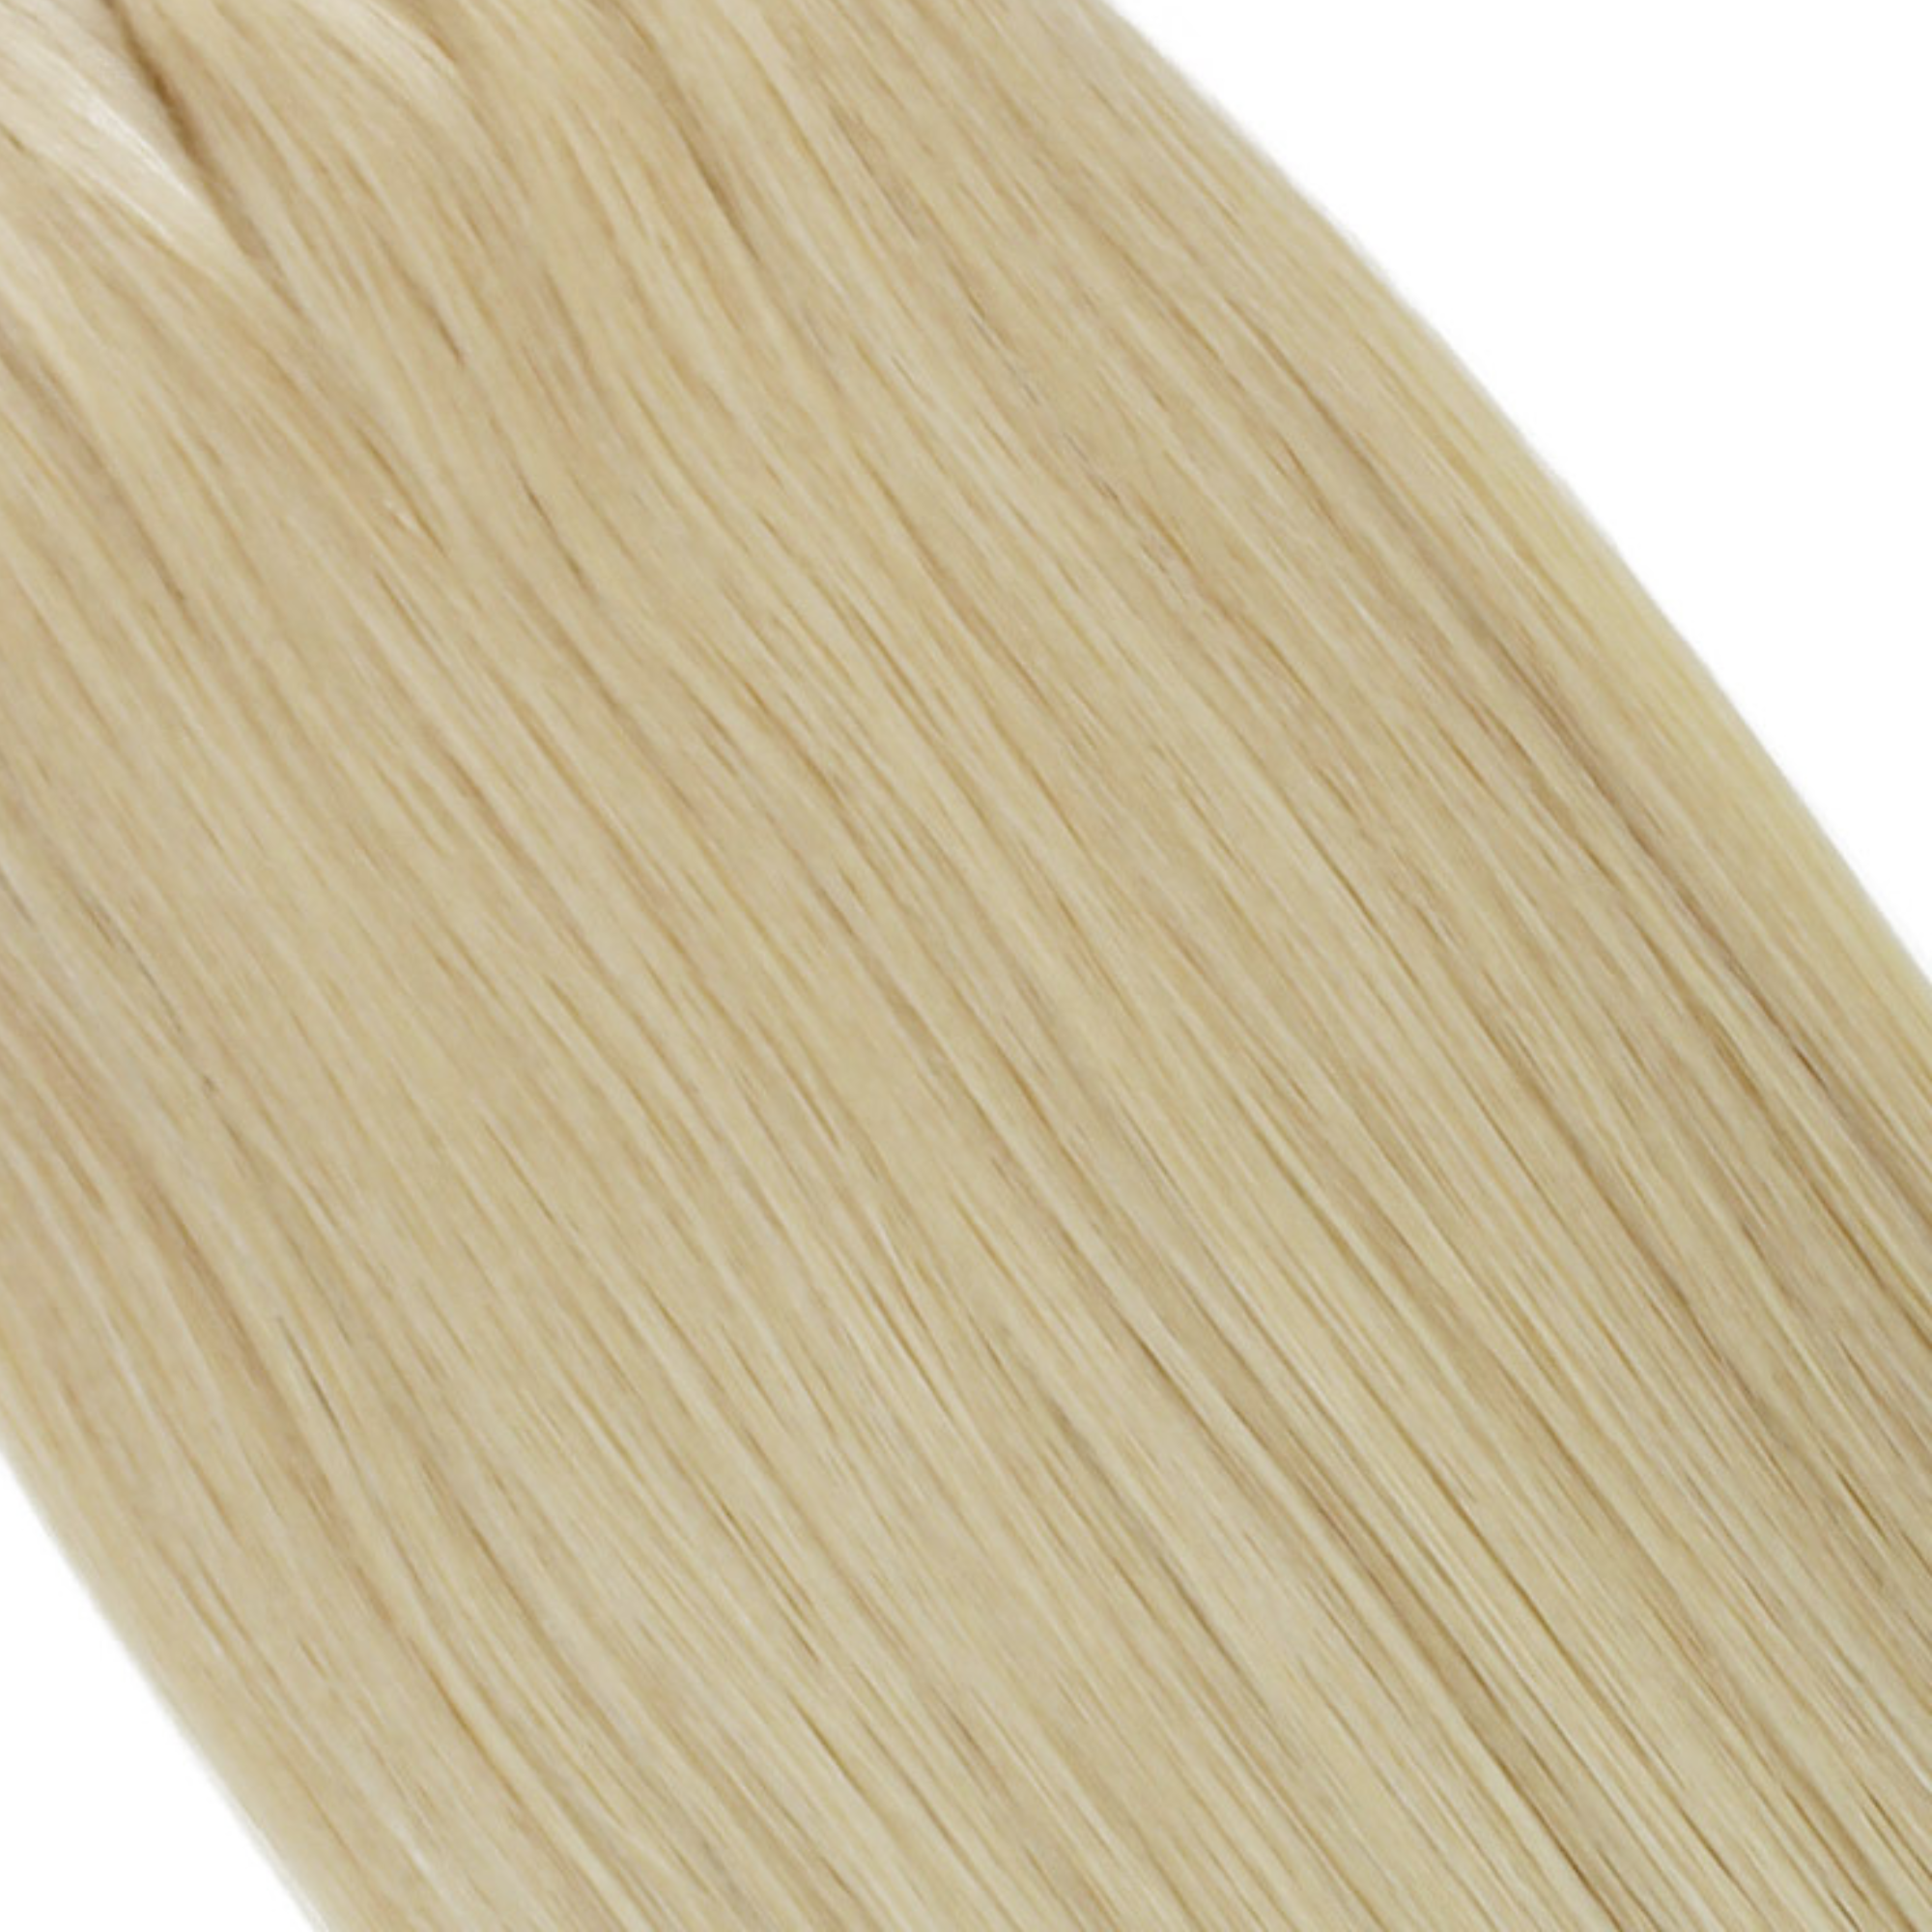 "hair rehab london 18" weft hair extensions shade swatch titled platinum"